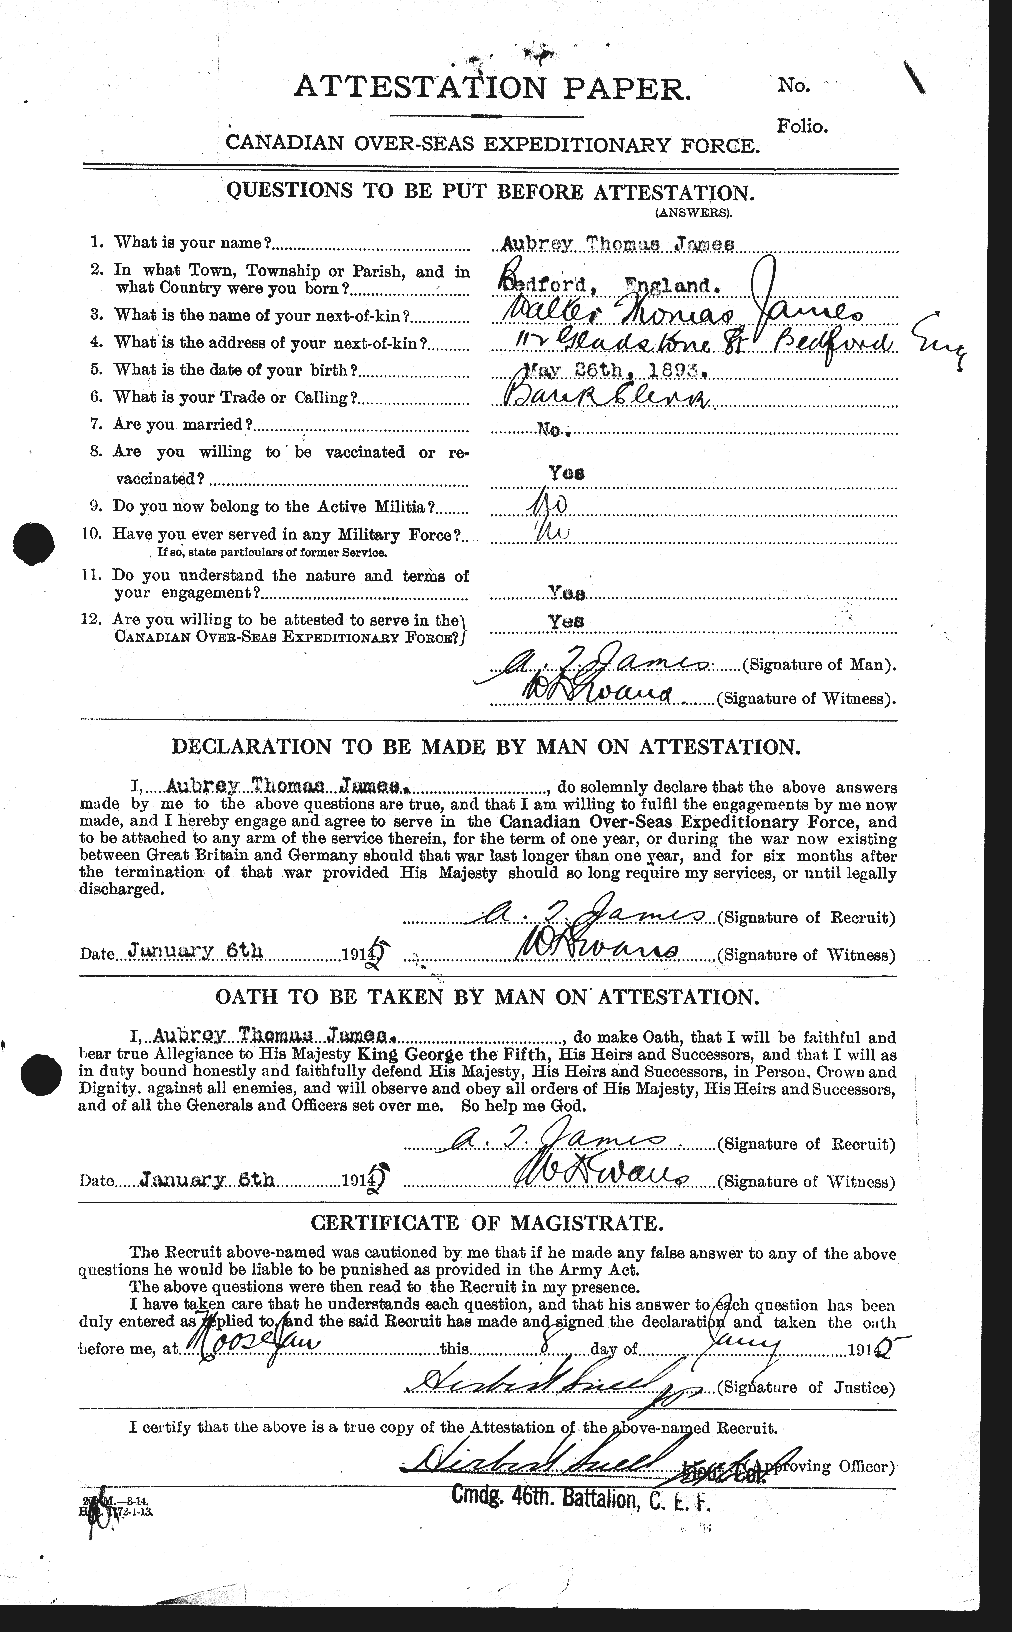 Personnel Records of the First World War - CEF 419223a